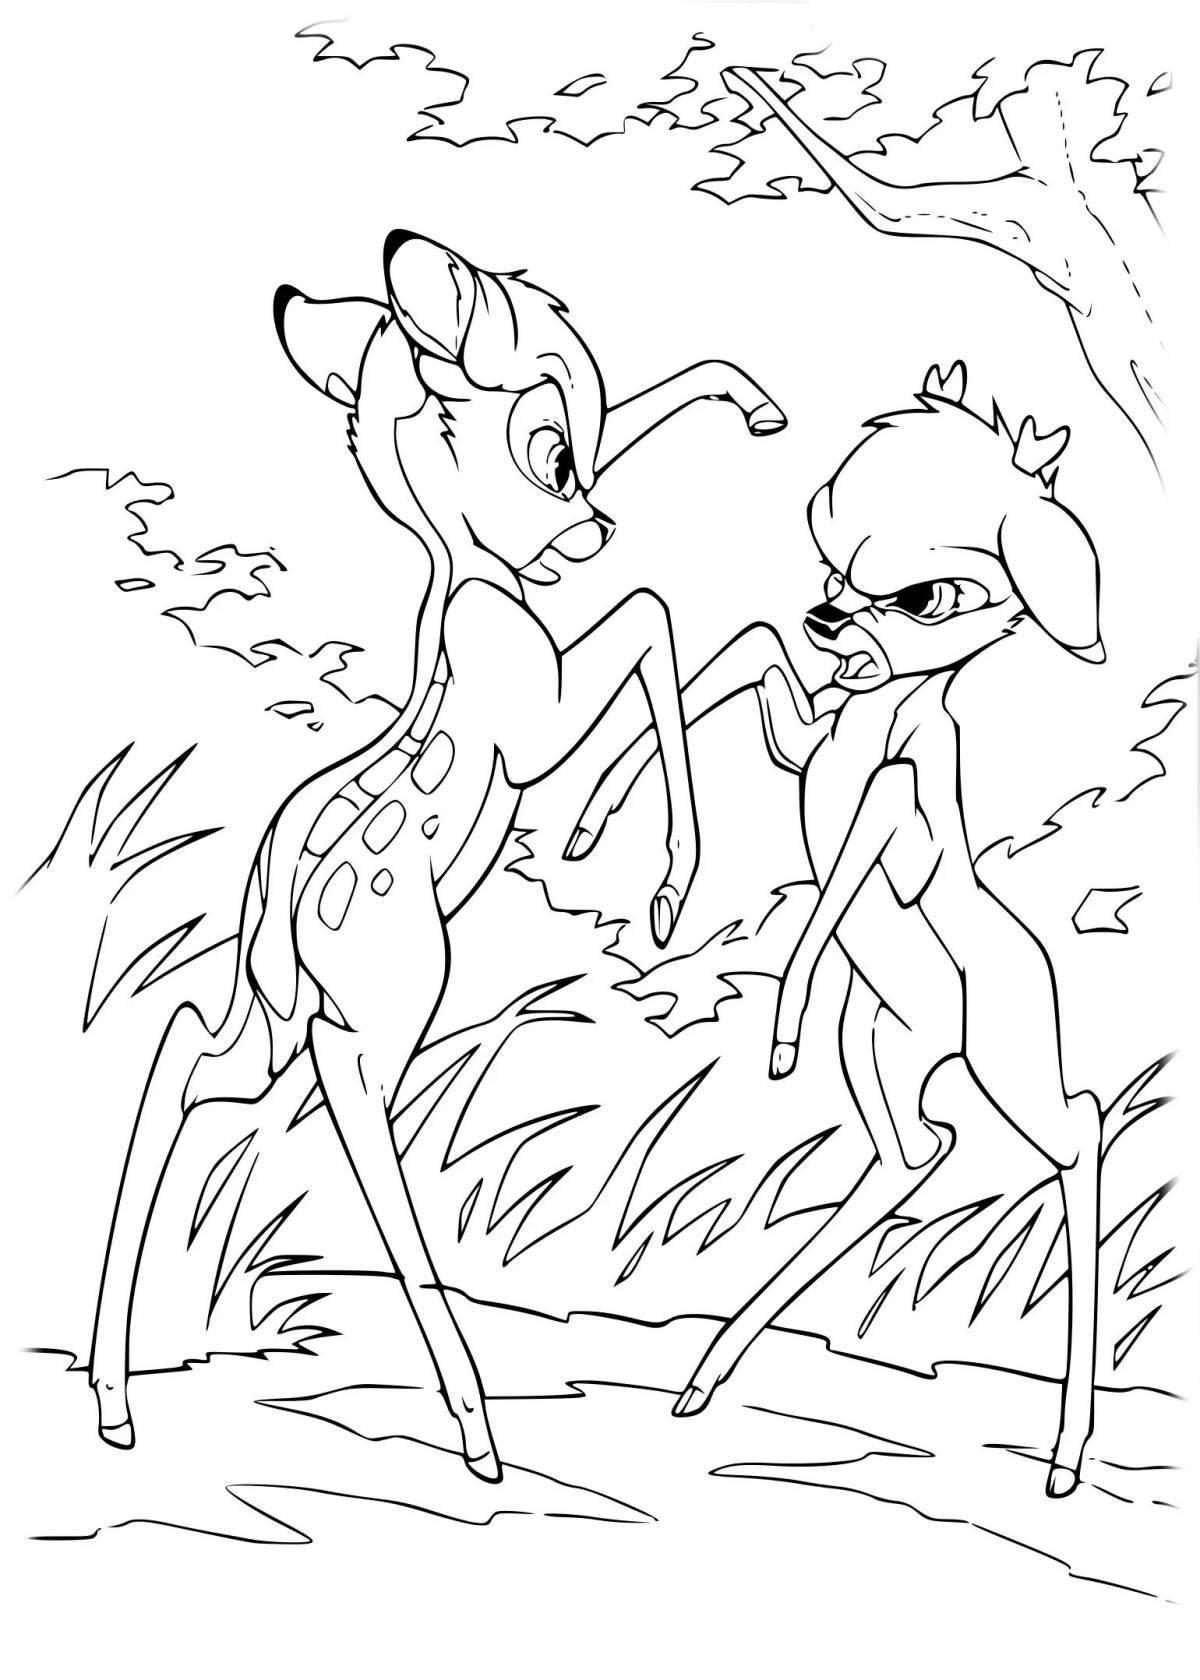 Sweet bambi coloring for kids